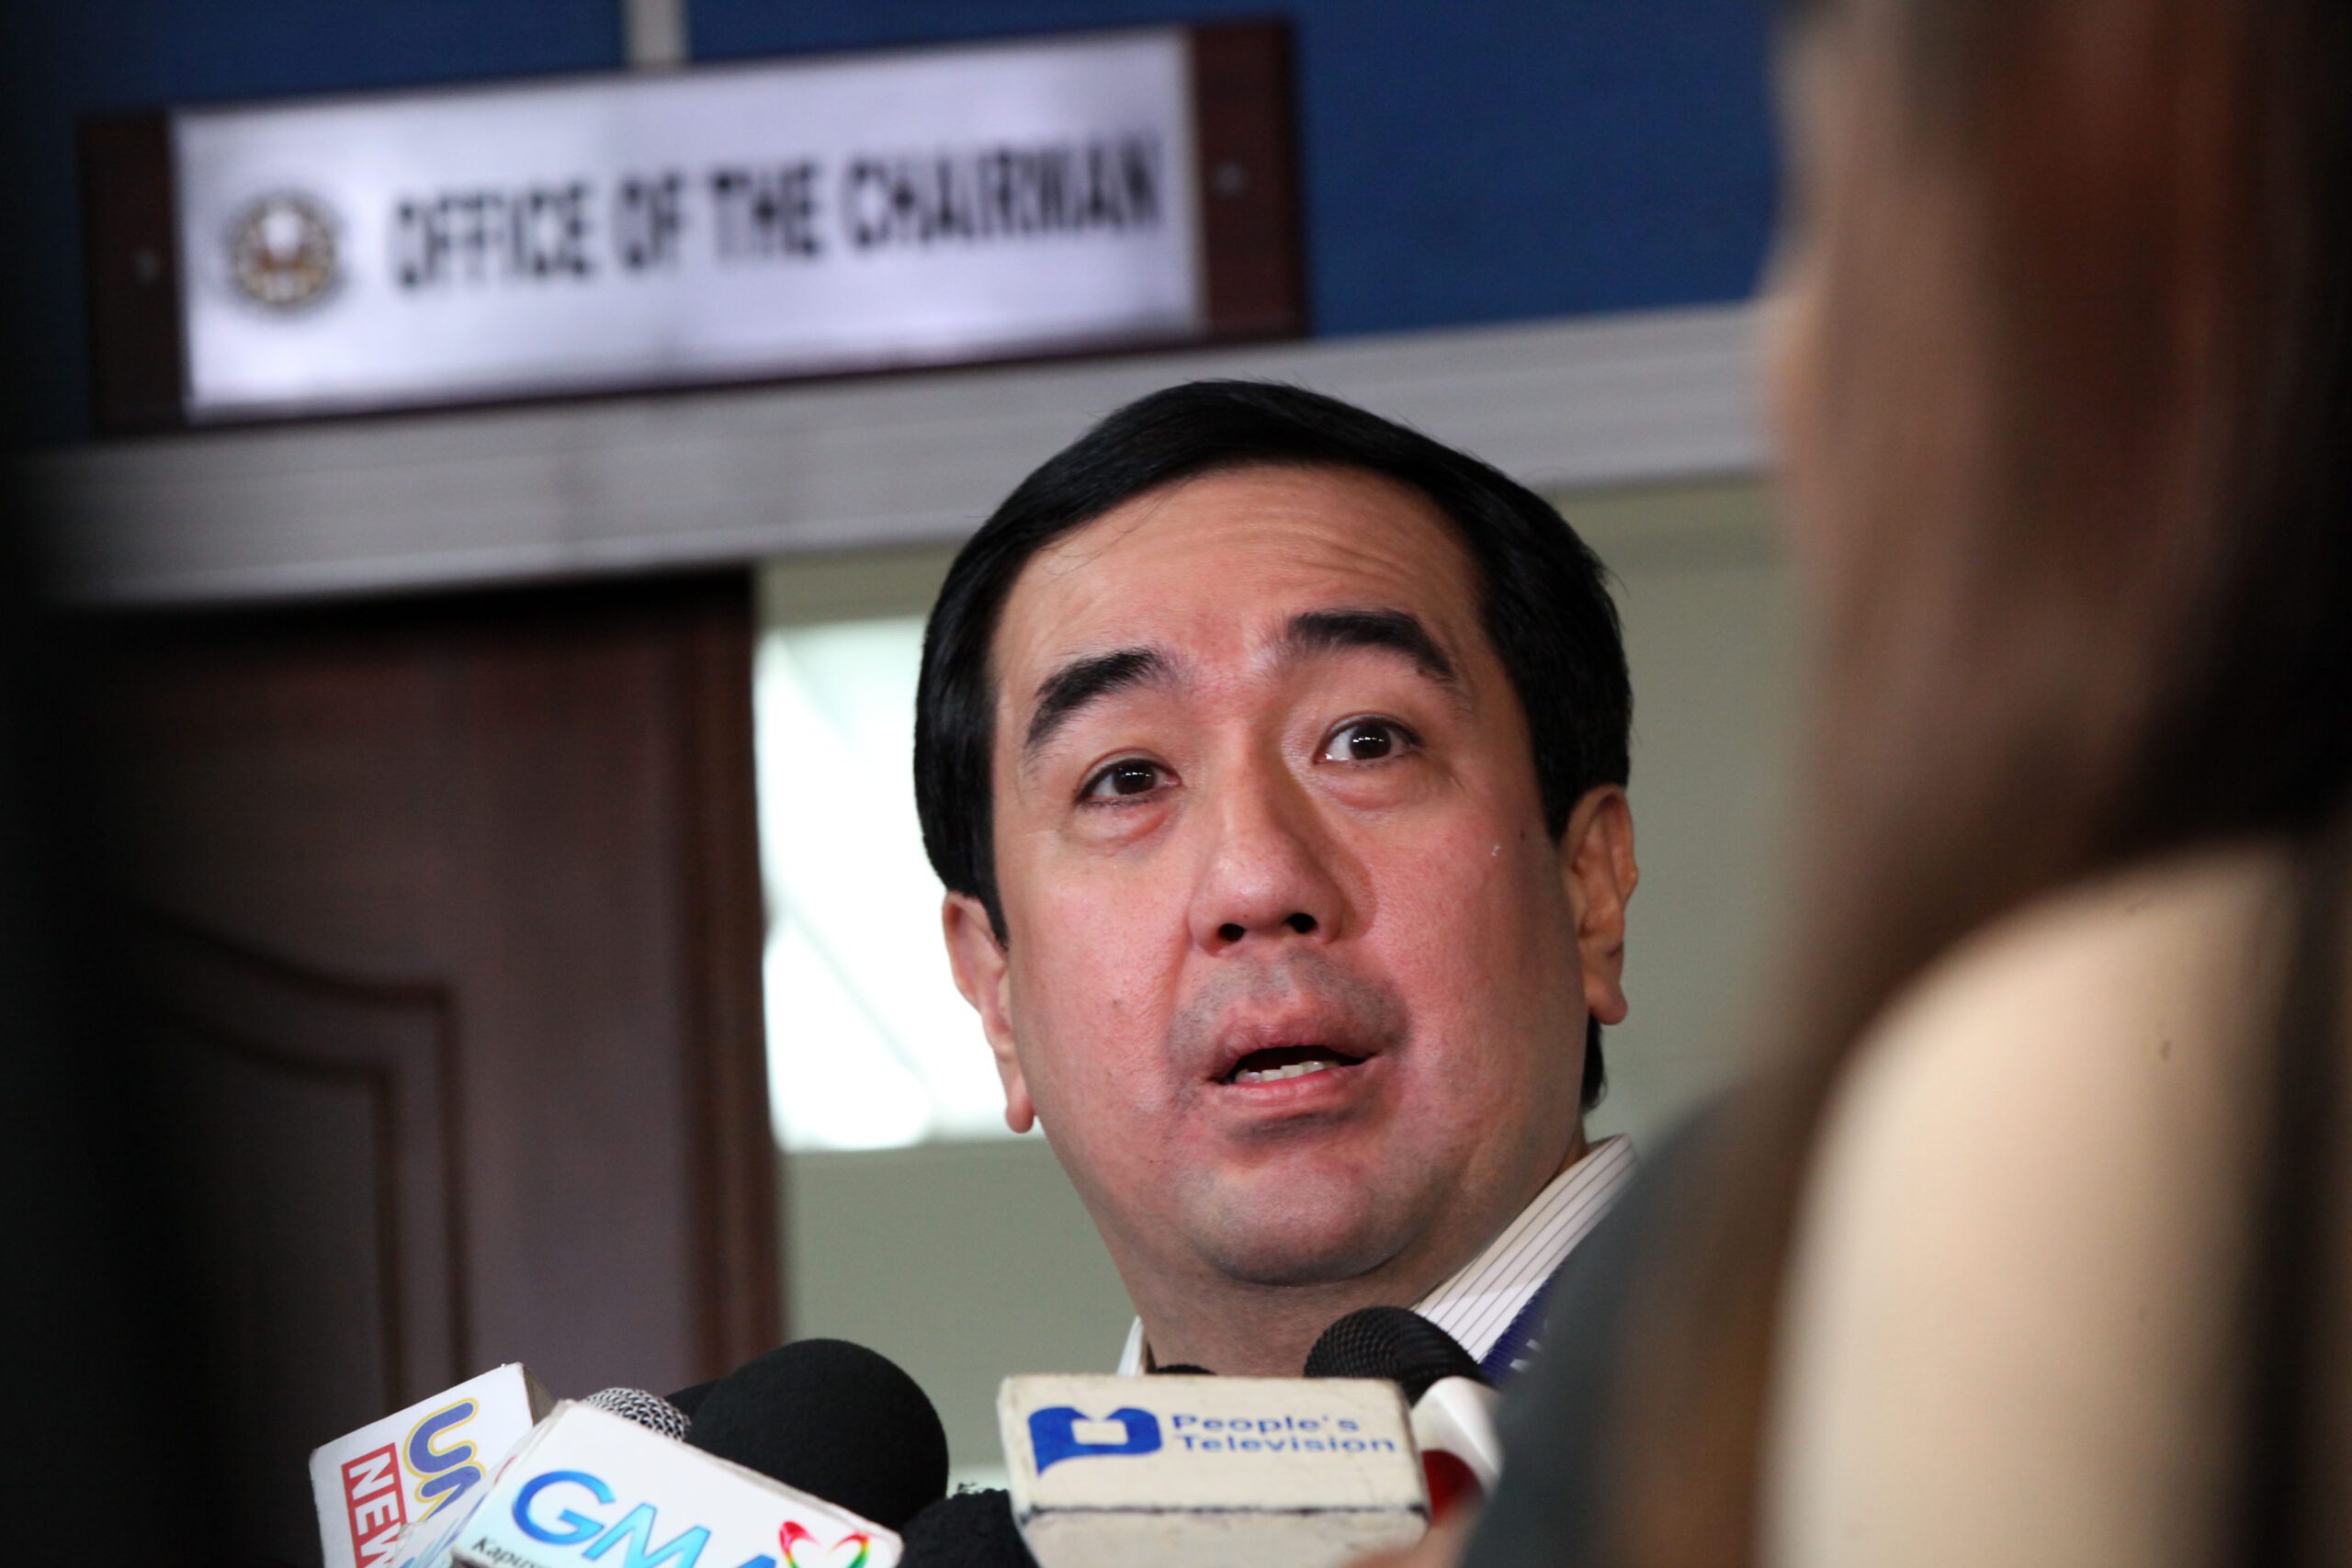 FAST FACTS: Who is Comelec chair Andres Bautista?